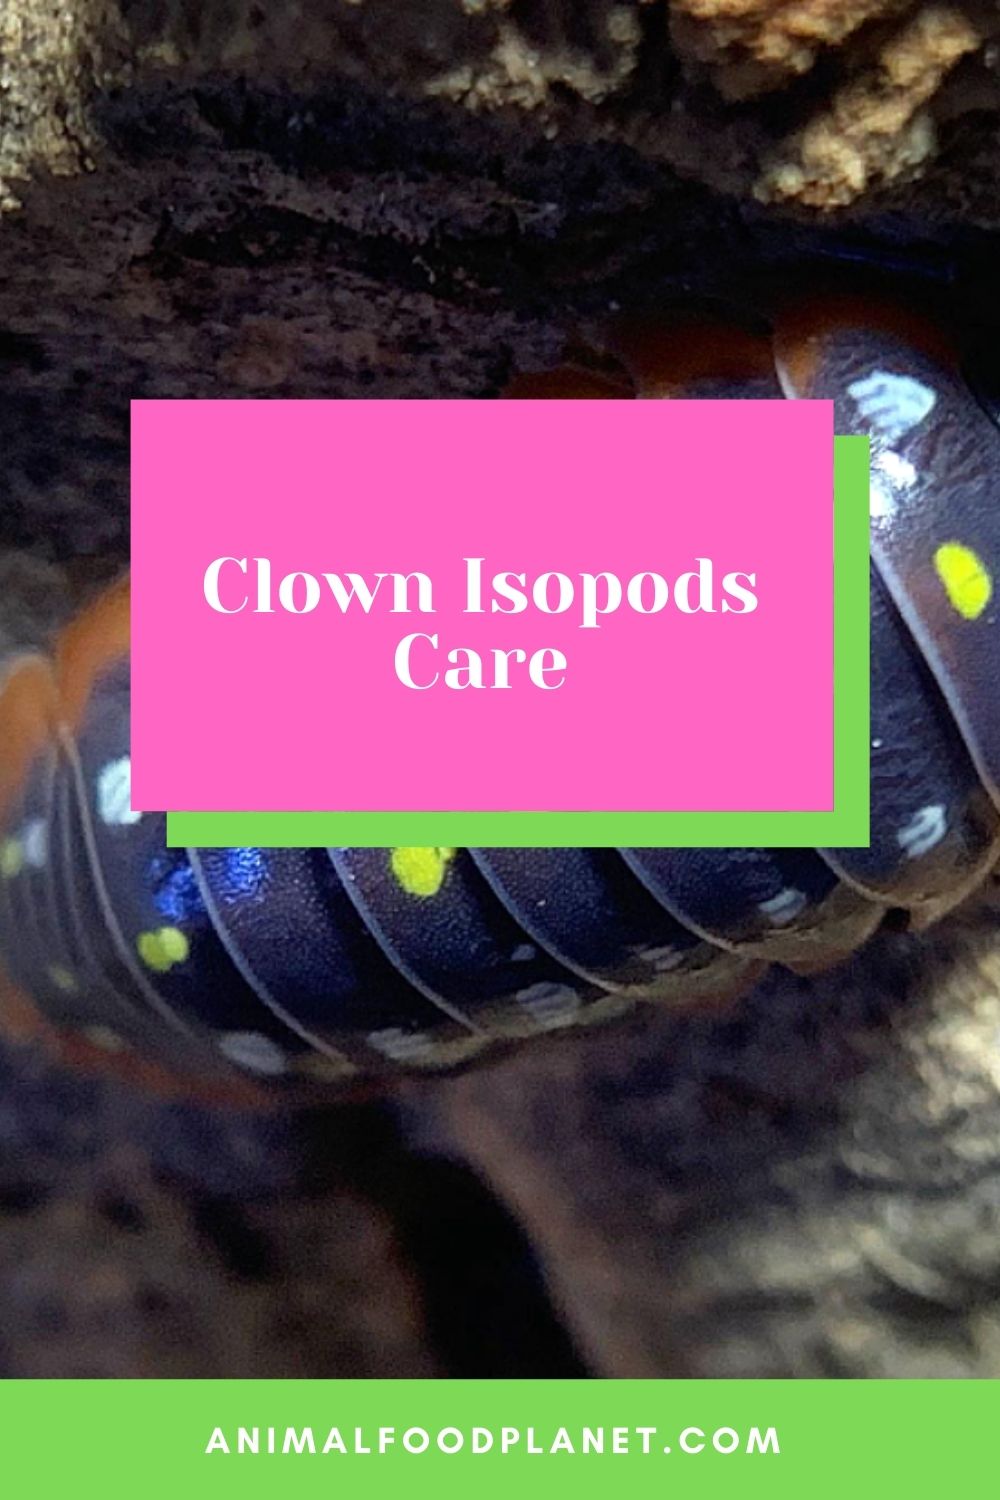 Clown Isopods Care